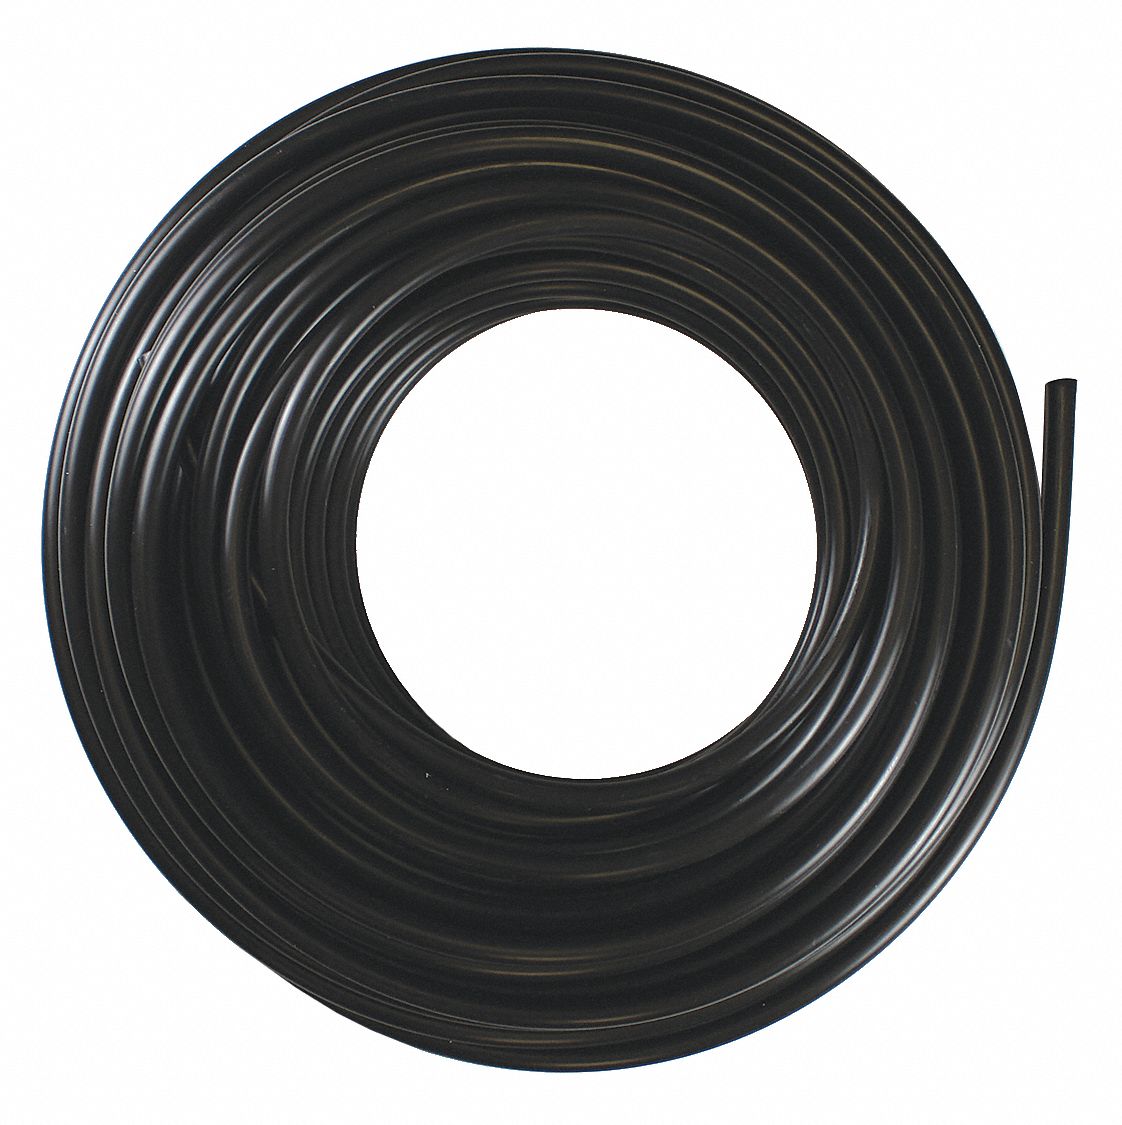 GRAINGER APPROVED HDPE34X58ANA Tubing,3/4 In OD,100 Ft L,Natural 